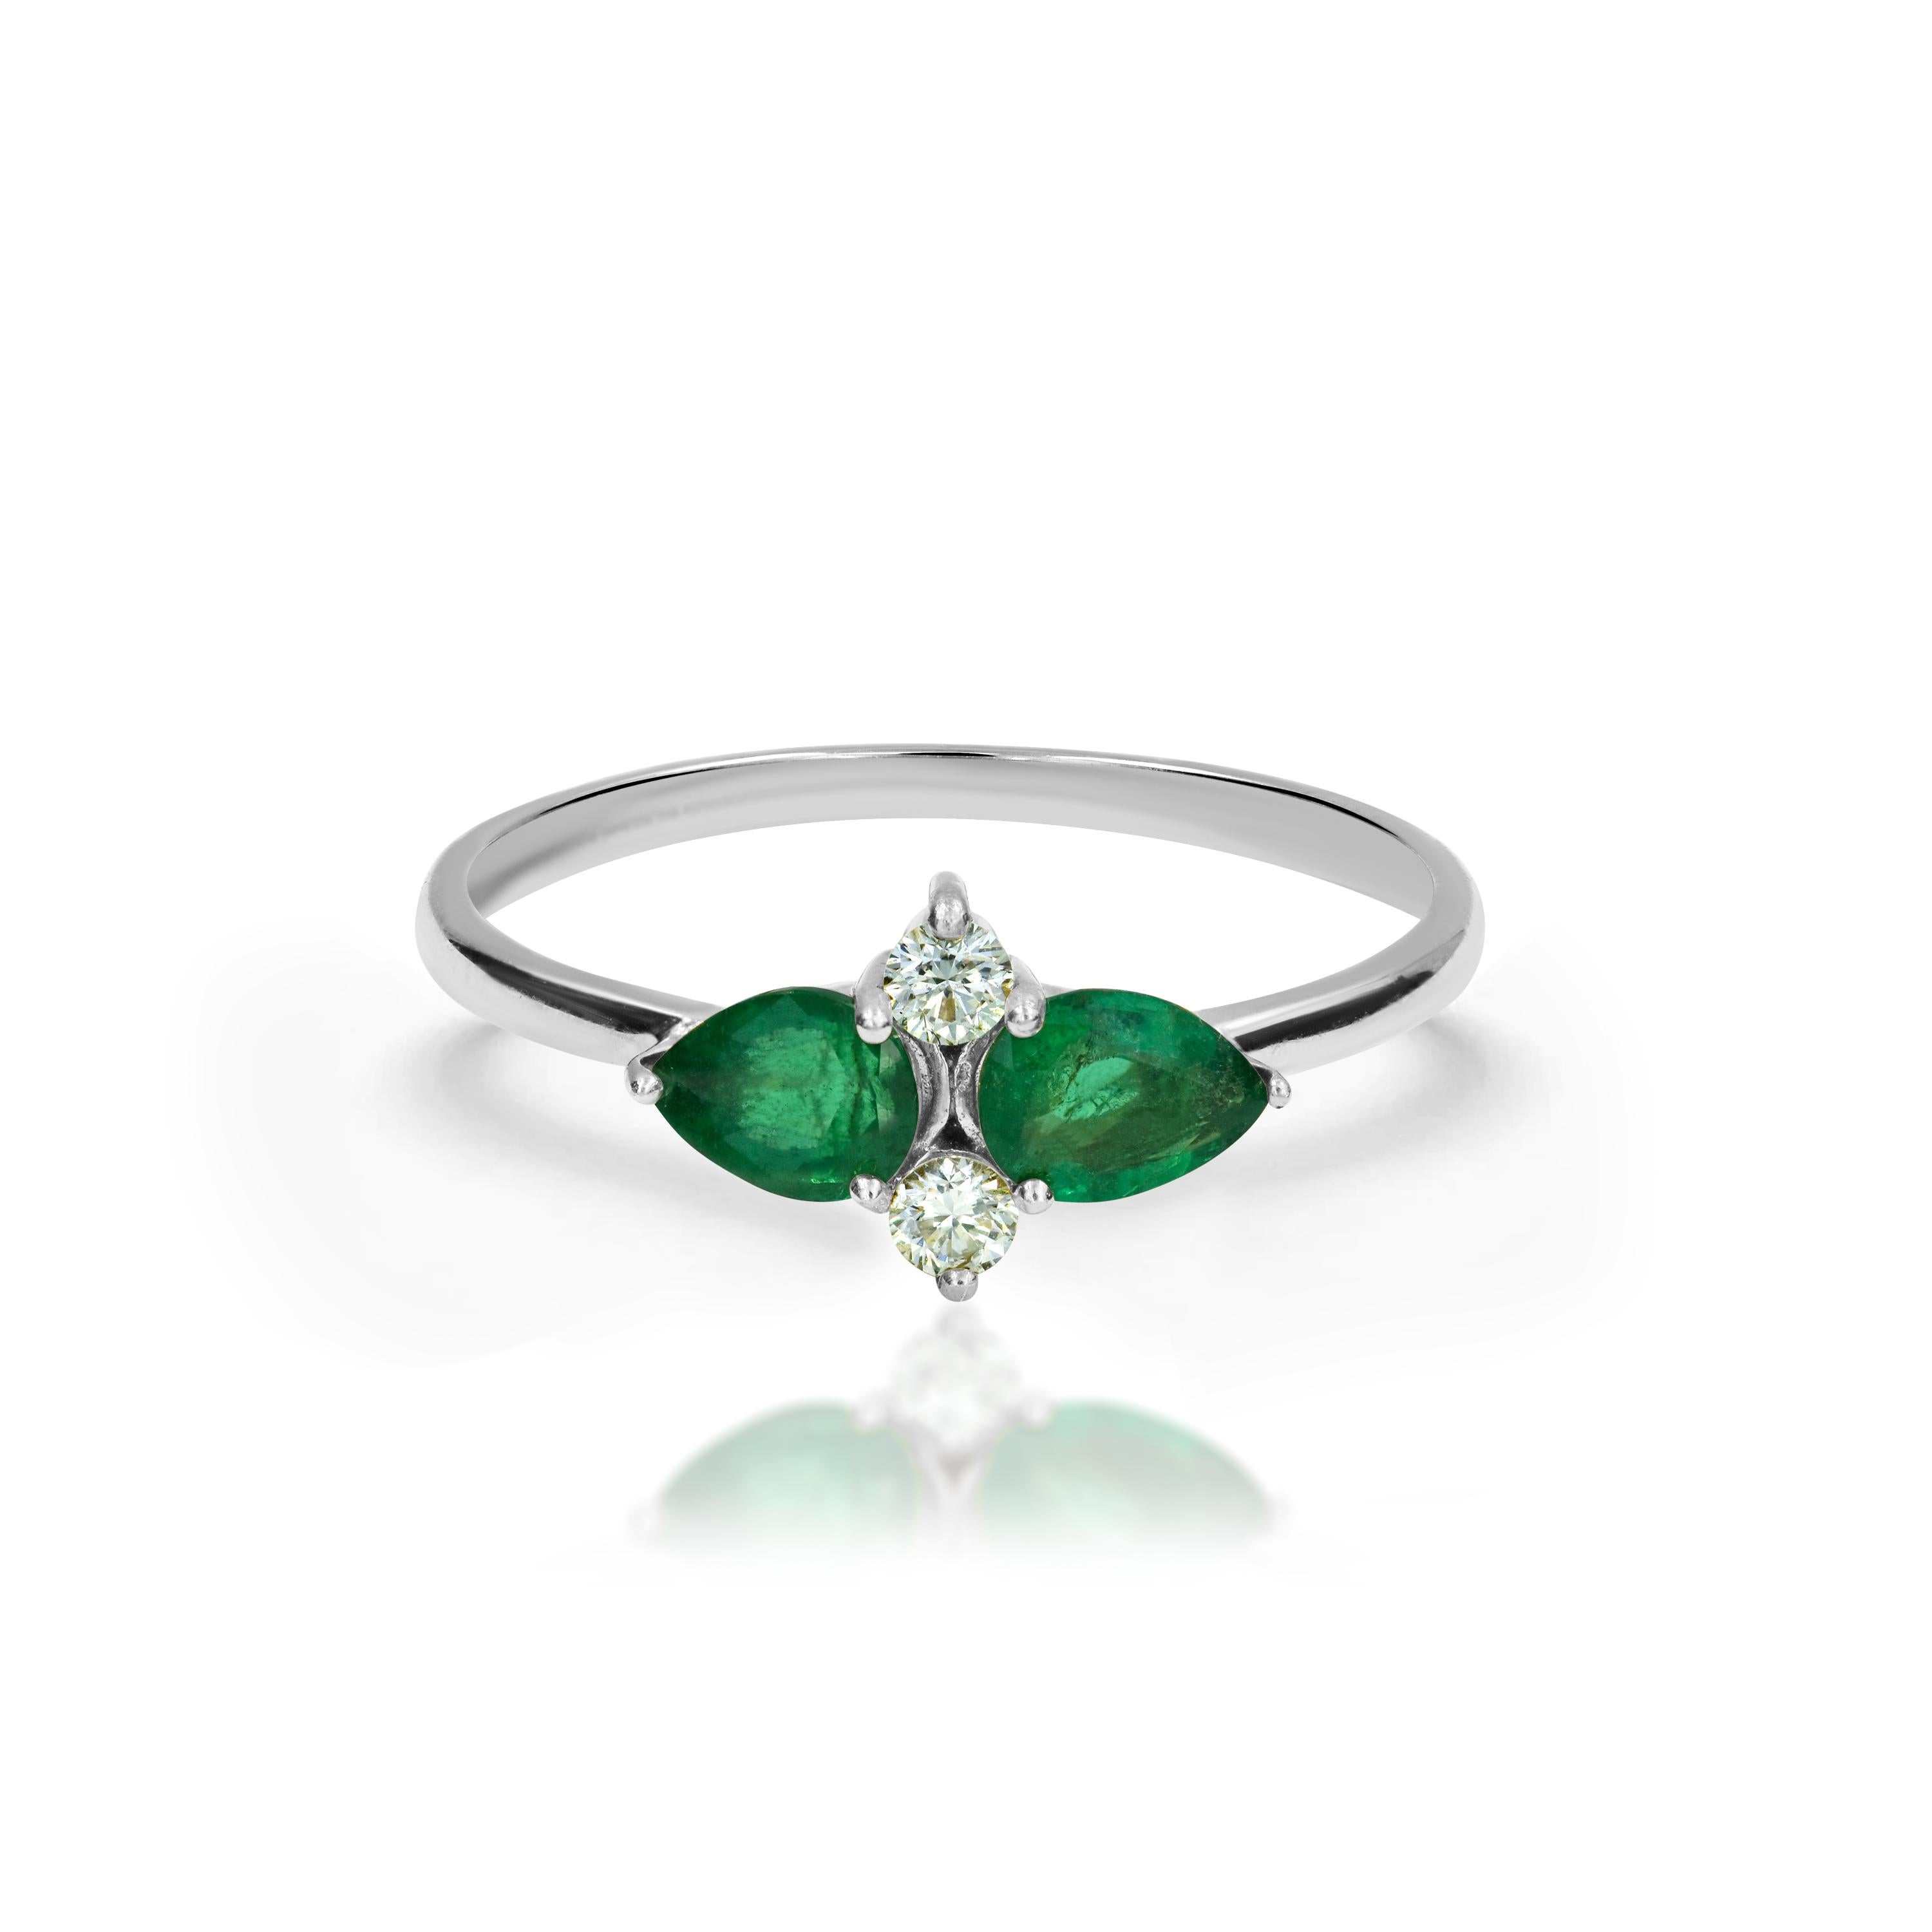 For Sale:  18k Gold Pear Shape 0.56 Carat Emerald and Diamond Engagement Ring 4